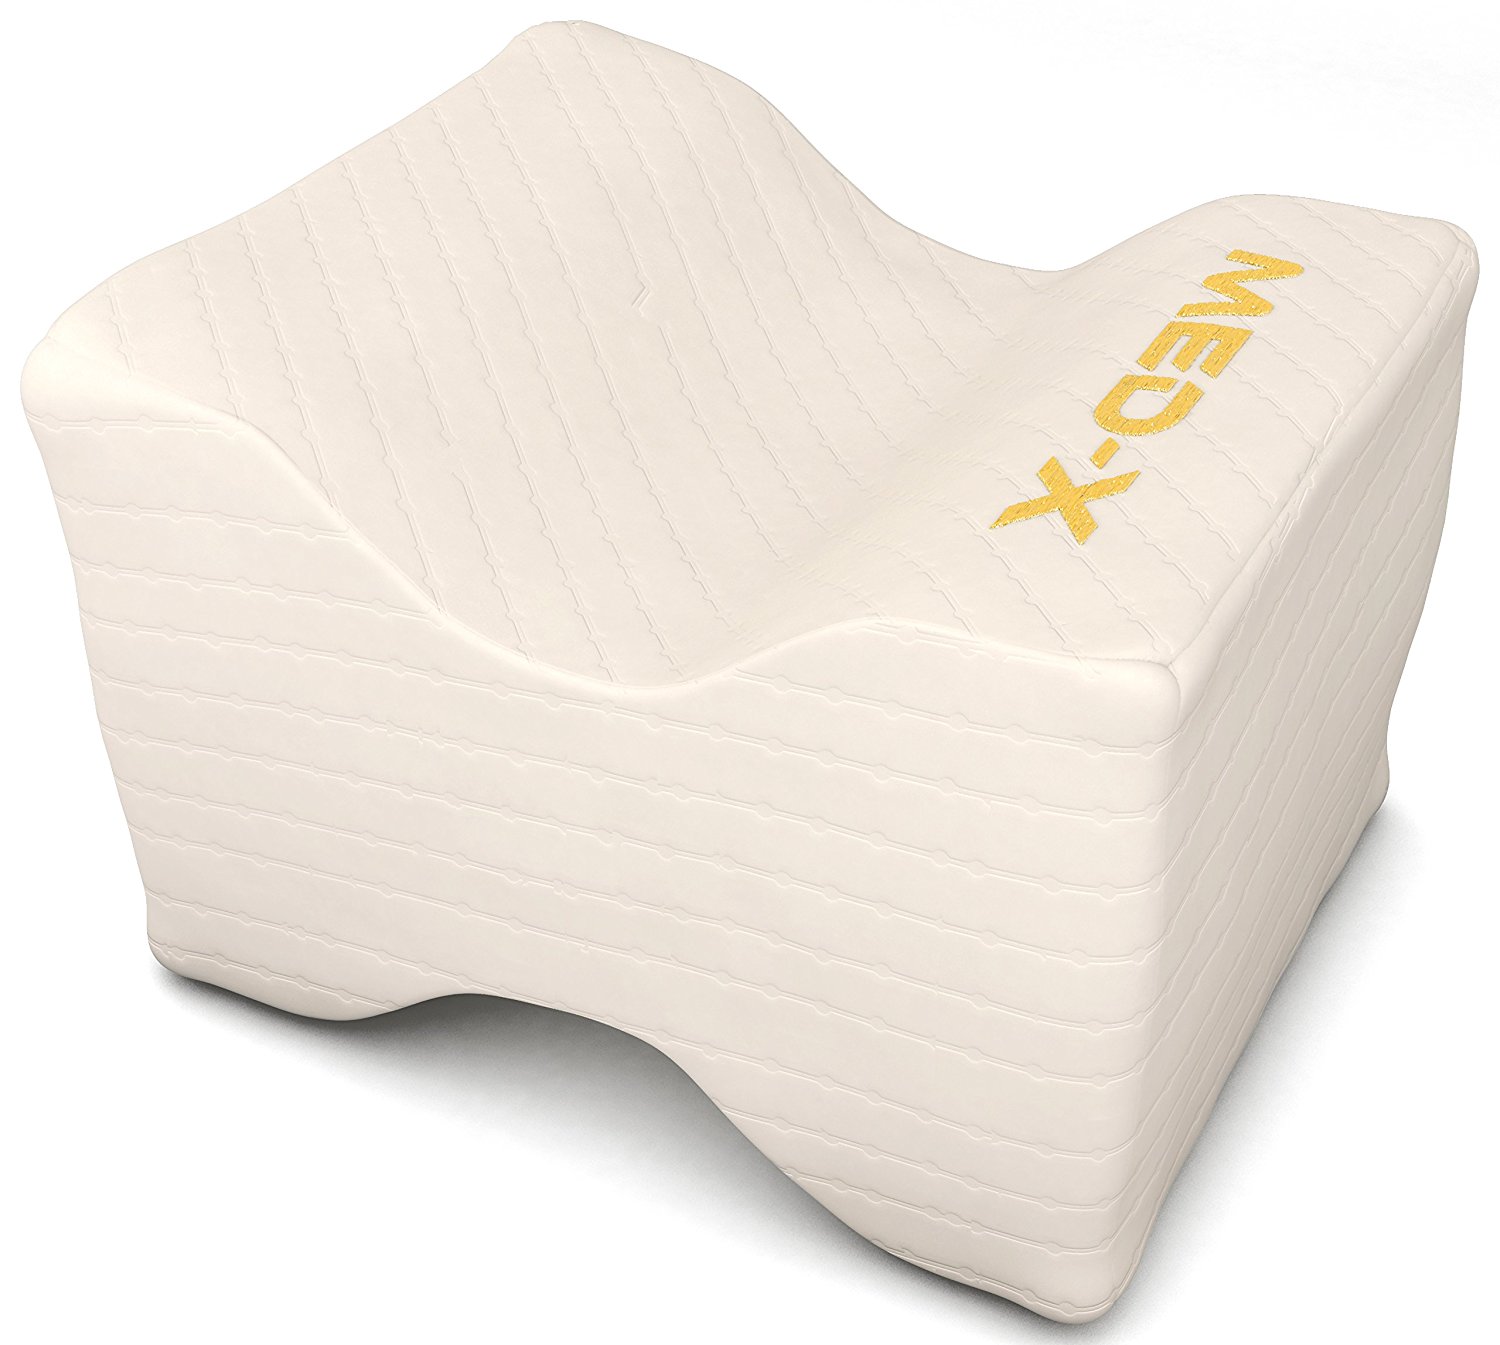 Knee pillow pain relief for sciatic nerve, leg, back, pregnancy - memory foam wedge with breathable cover